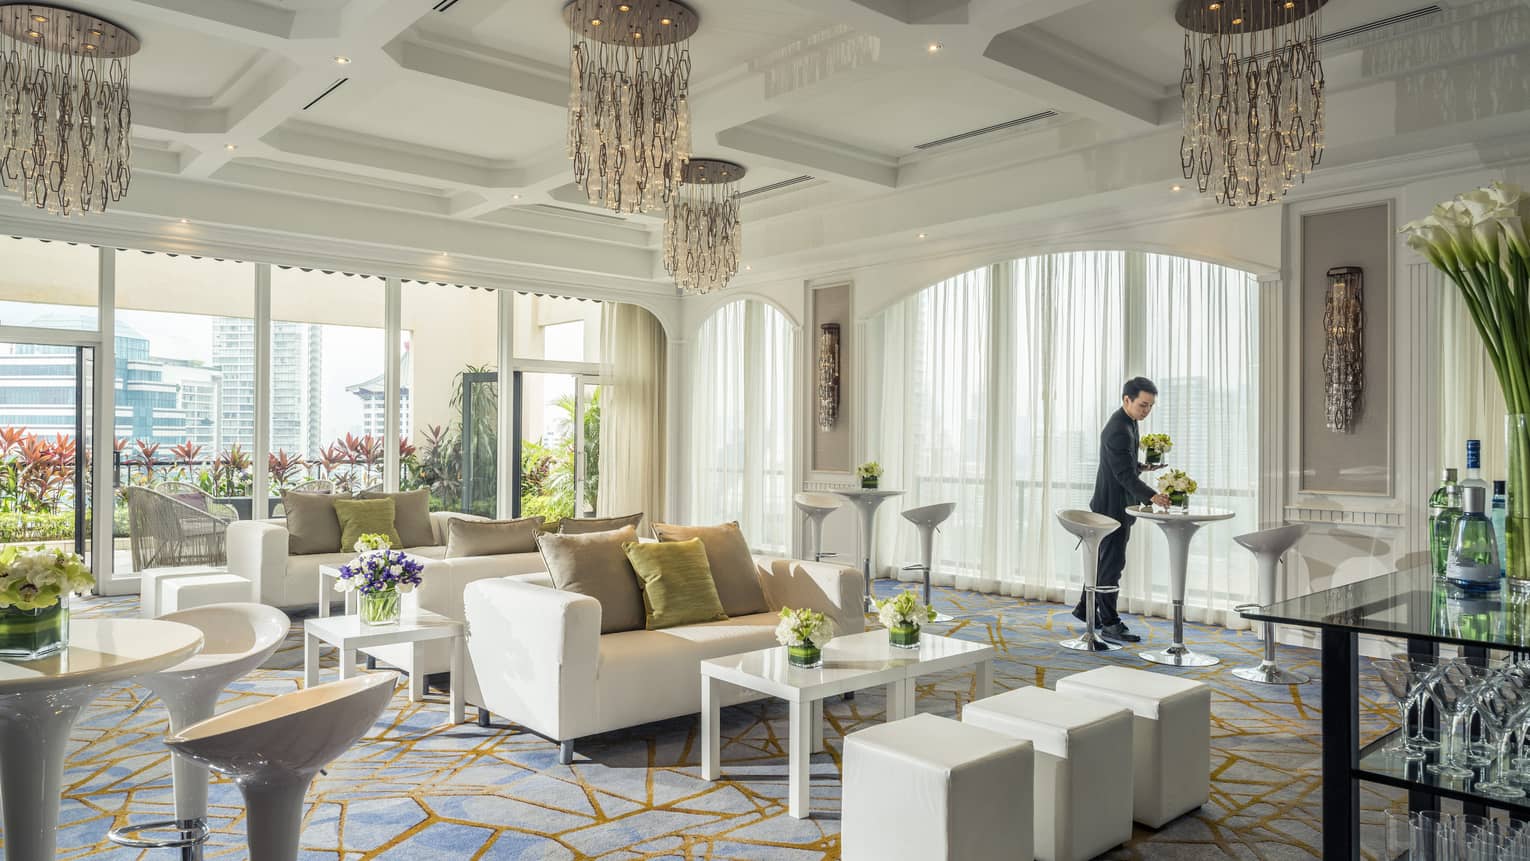 A bright room is decorated with plush couches, tables with flowers and artistic chandeliers